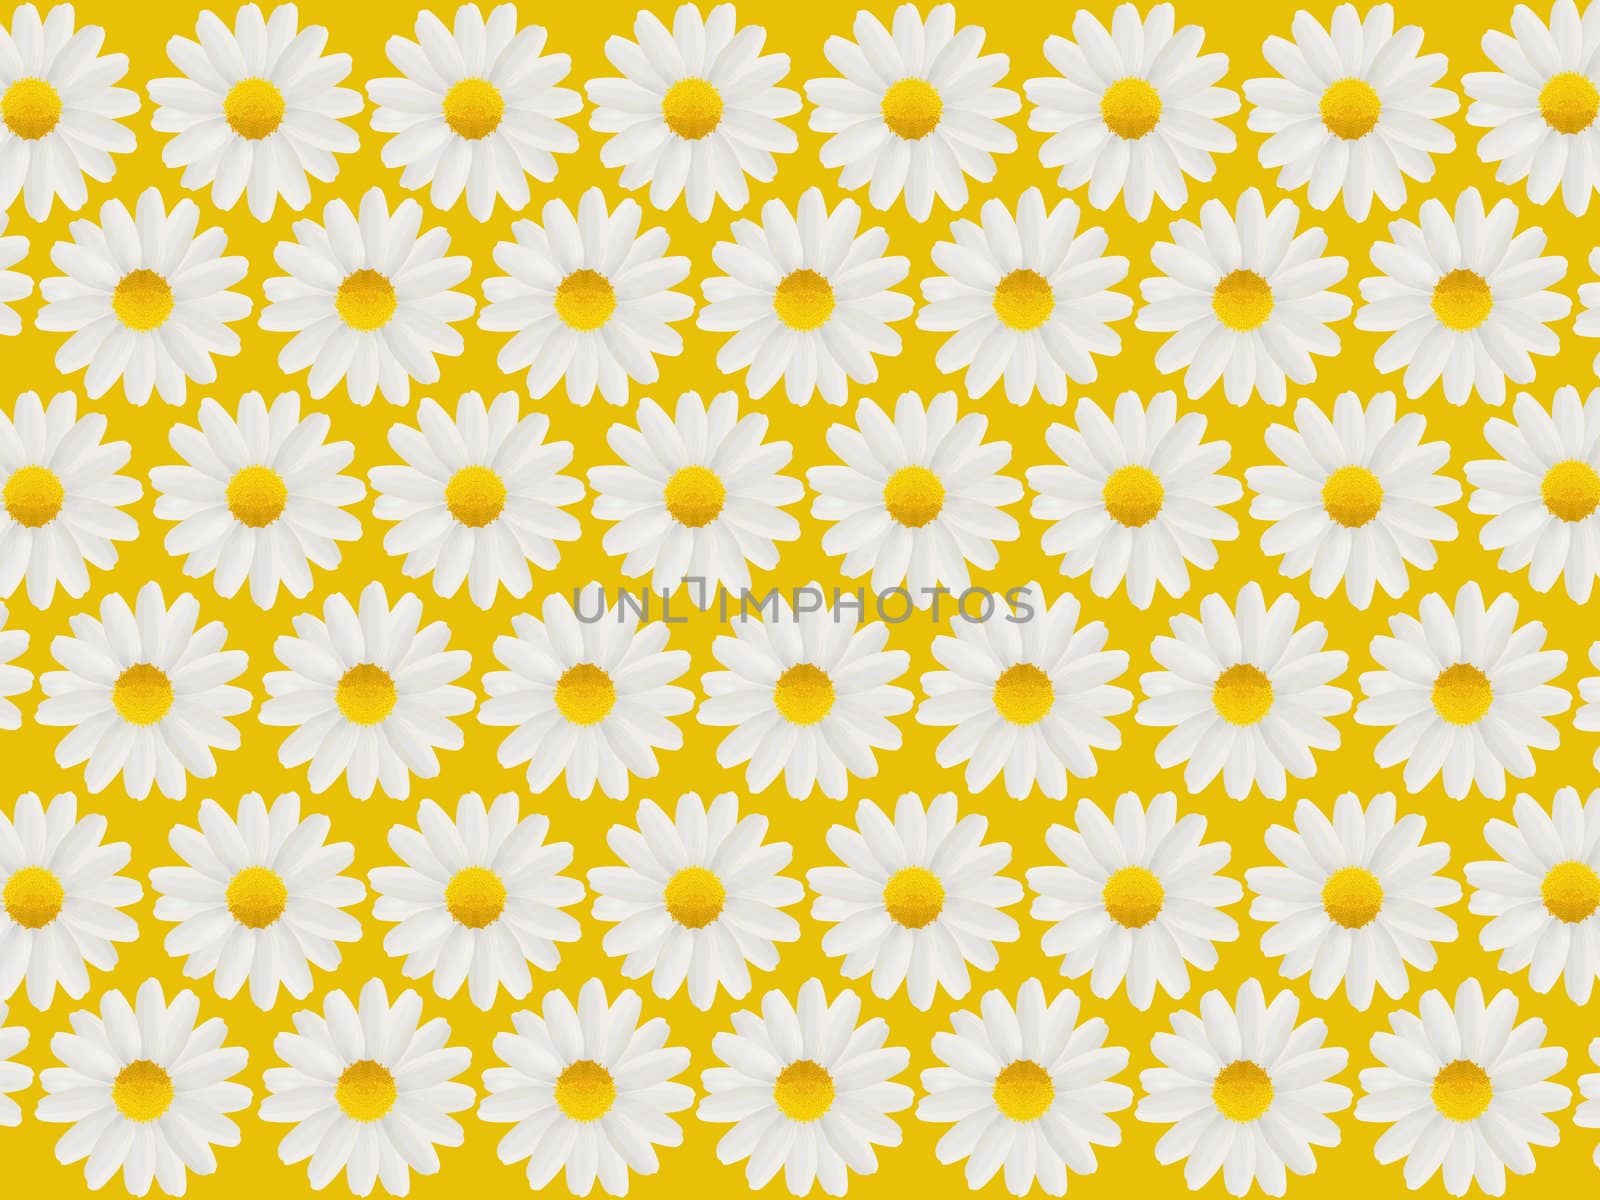 Happy Birthday card with white daisies on a yellow background wallpaper